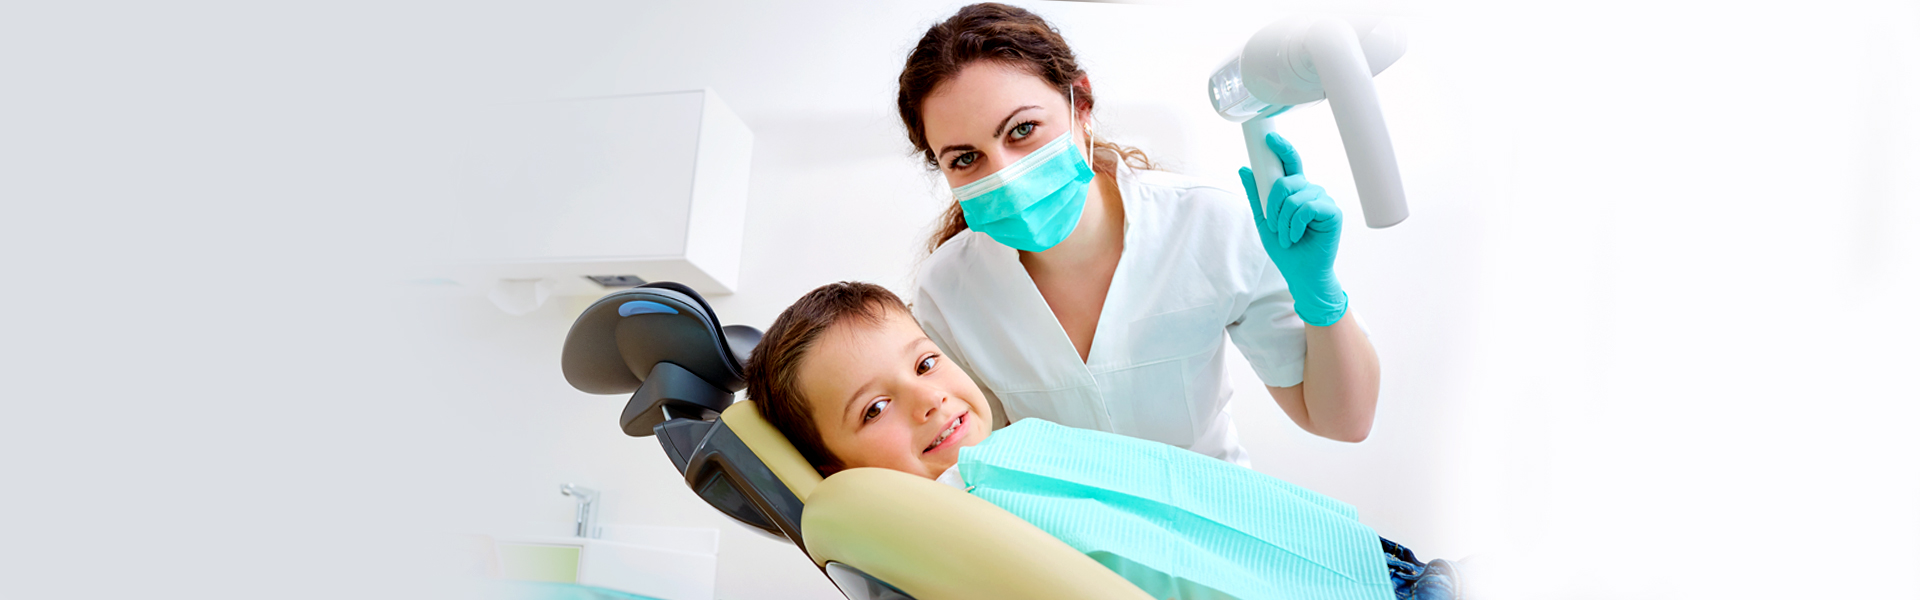 What Makes Children Dentistry Different from General Dentistry?